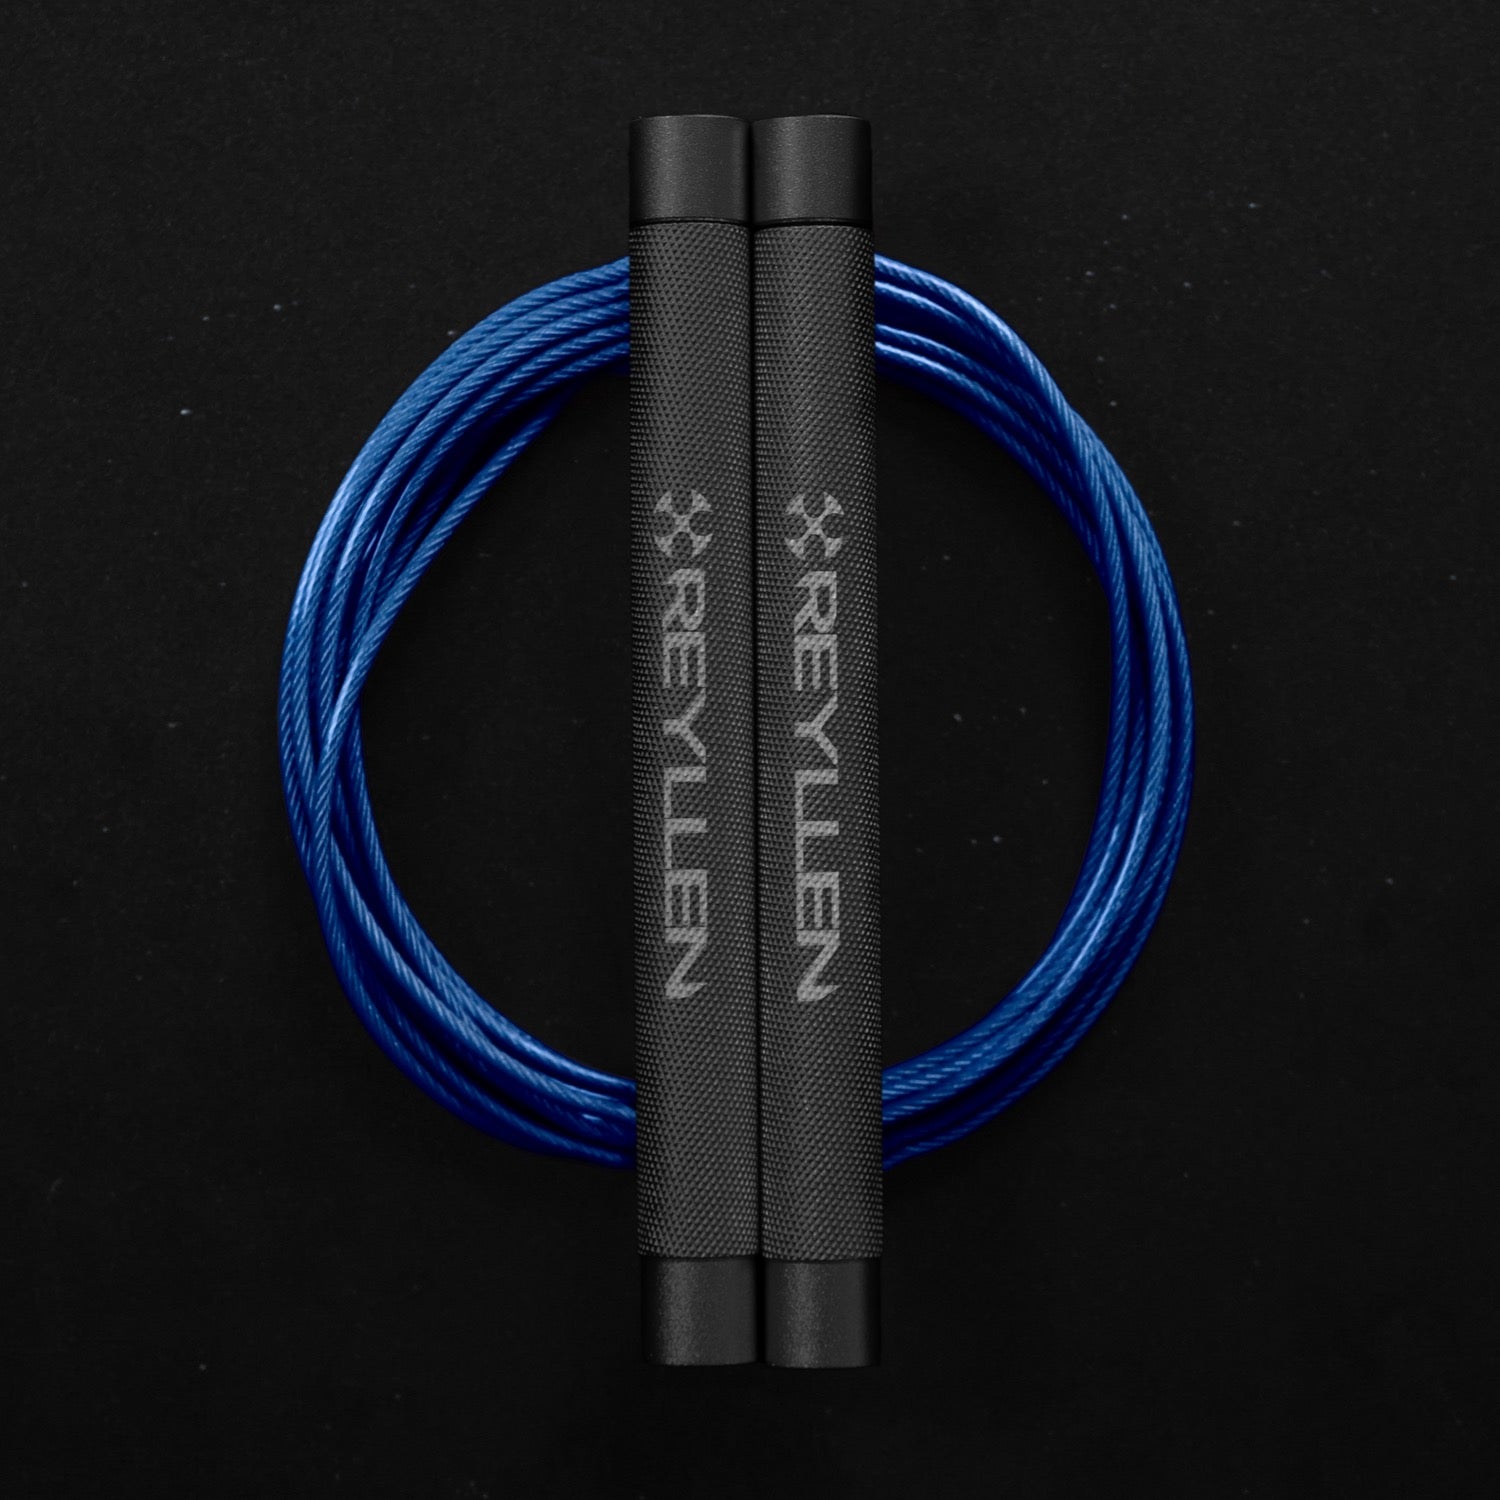 Reyllen Flare Mx Speed Skipping Jump Rope - Aluminium Handles - grey with blue pvc cable